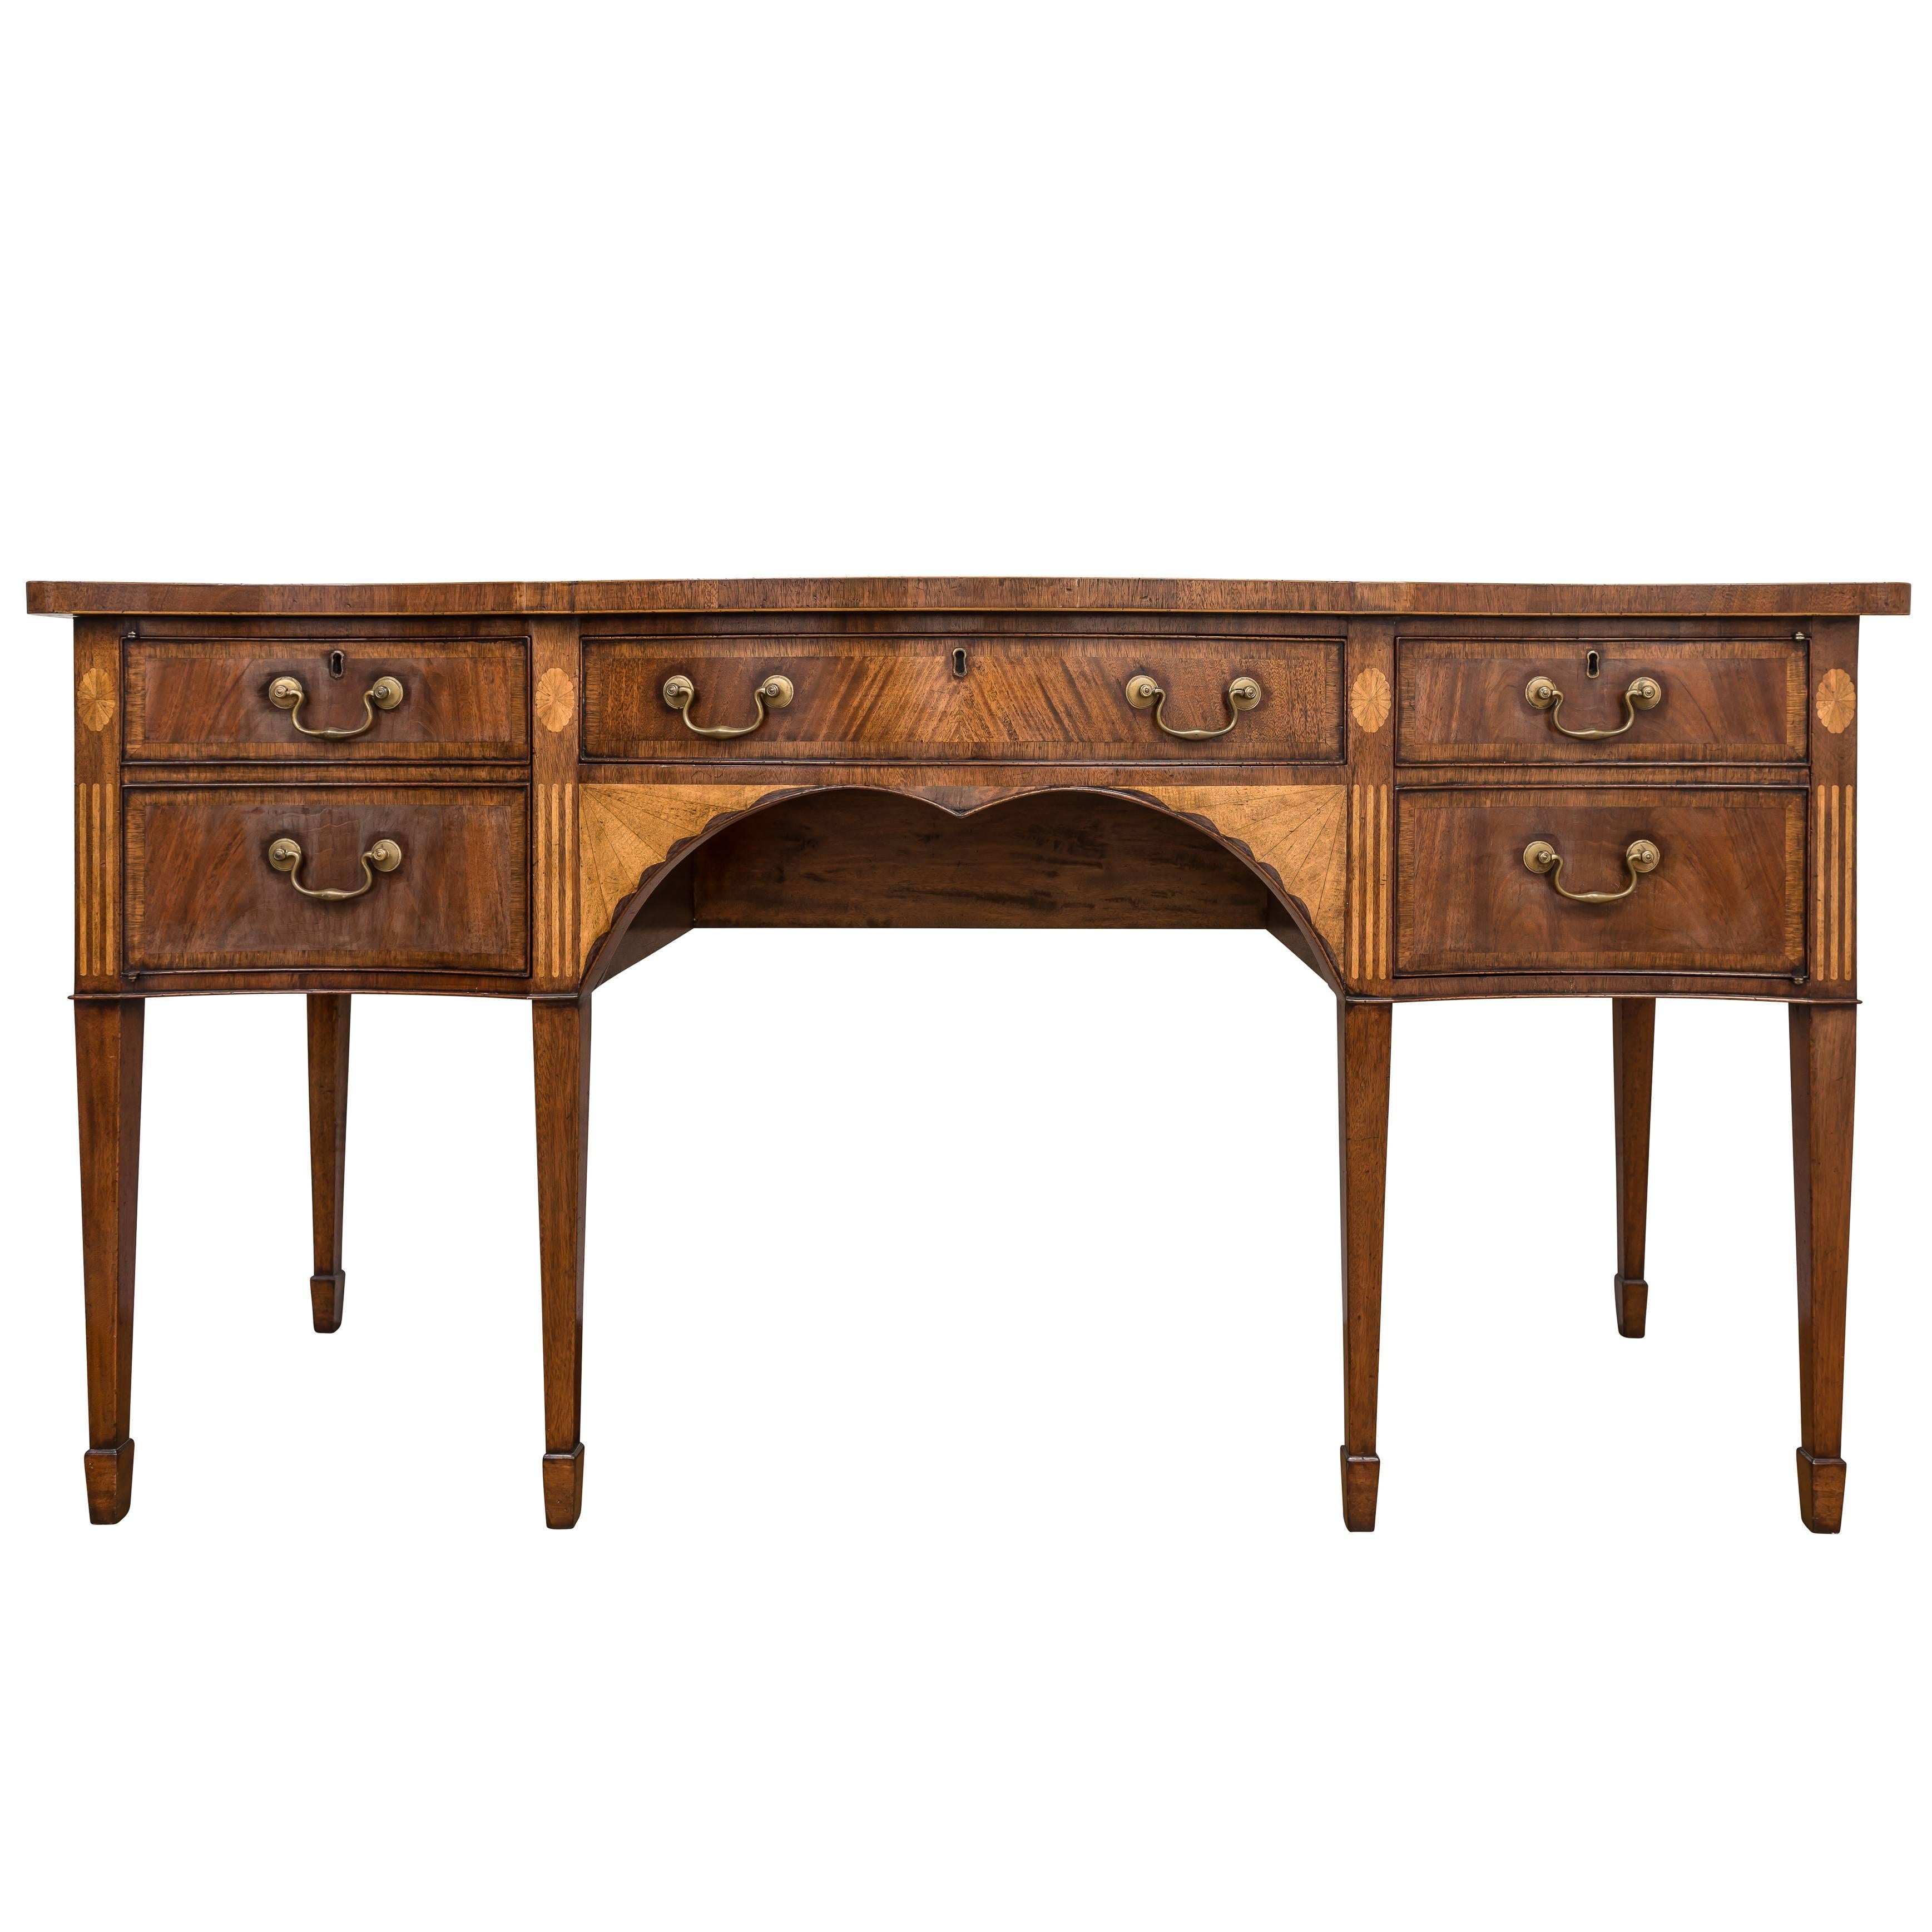 18th Century George III Mahogany Sideboard with Serpentine Front